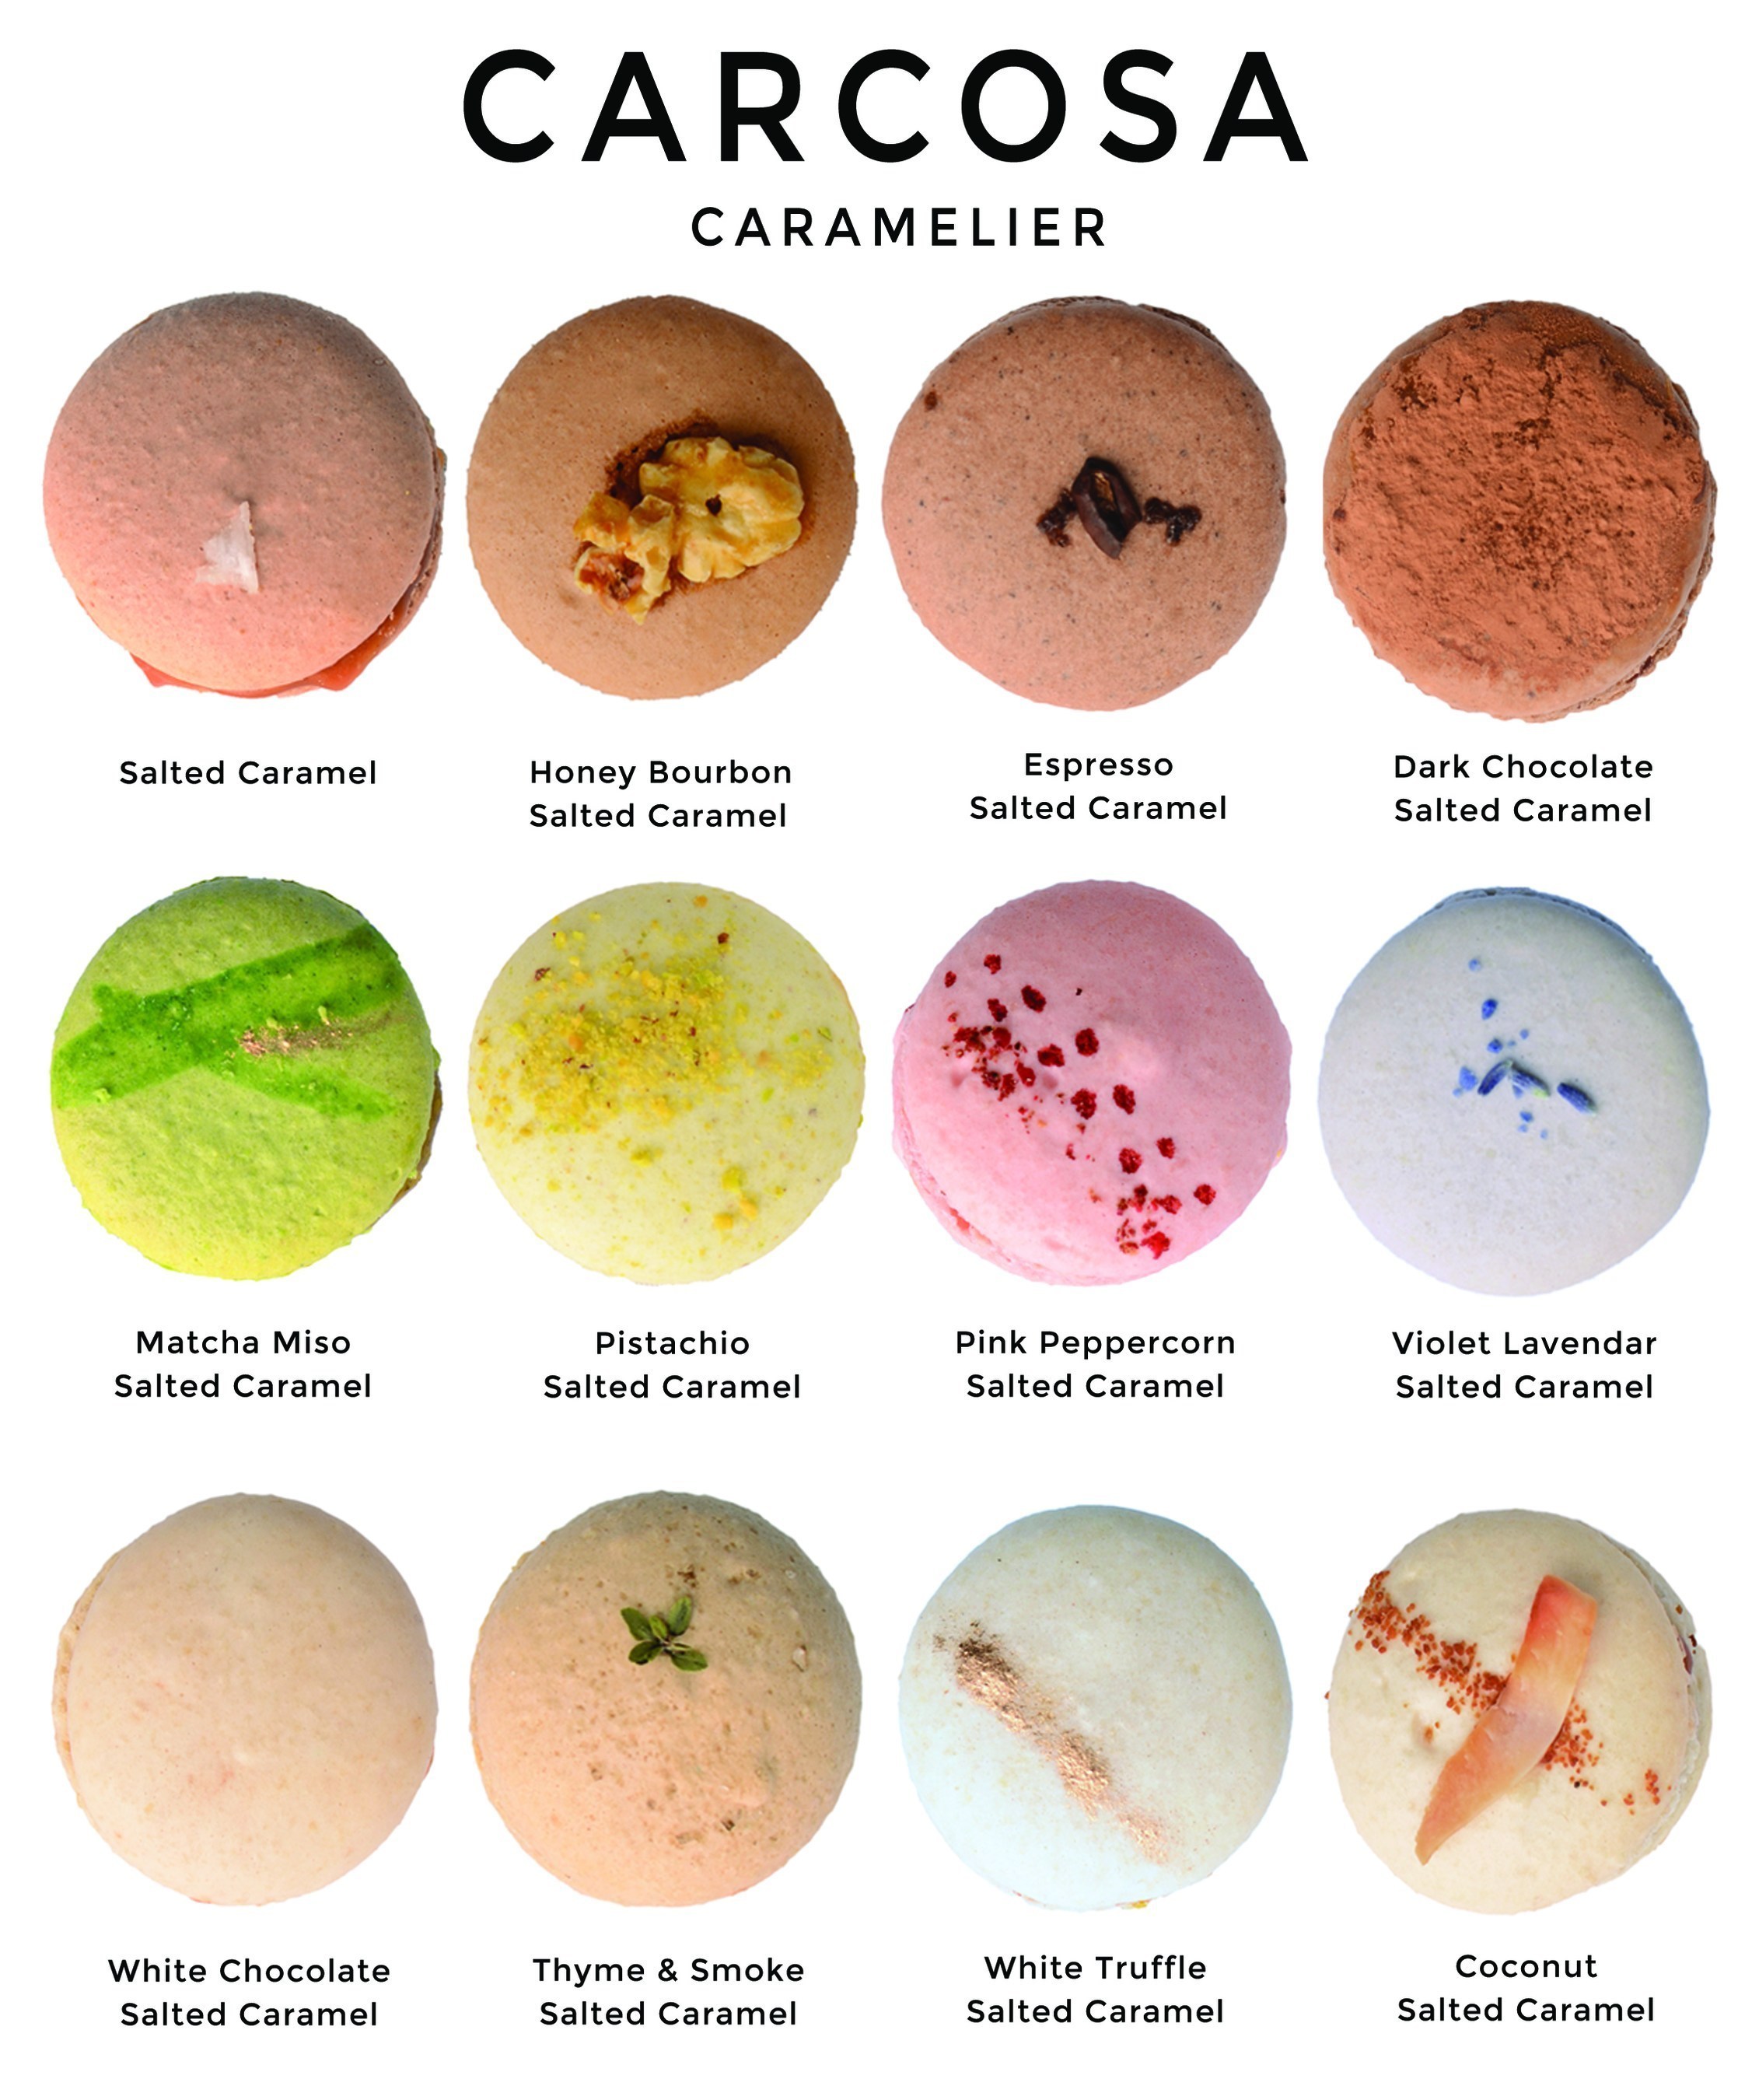 Introducing Carcosa, the salted caramel specialist. Unleashed late 2014 the Carcosa Macaron Collection features 12 flavor macarcons, all salted caramel!